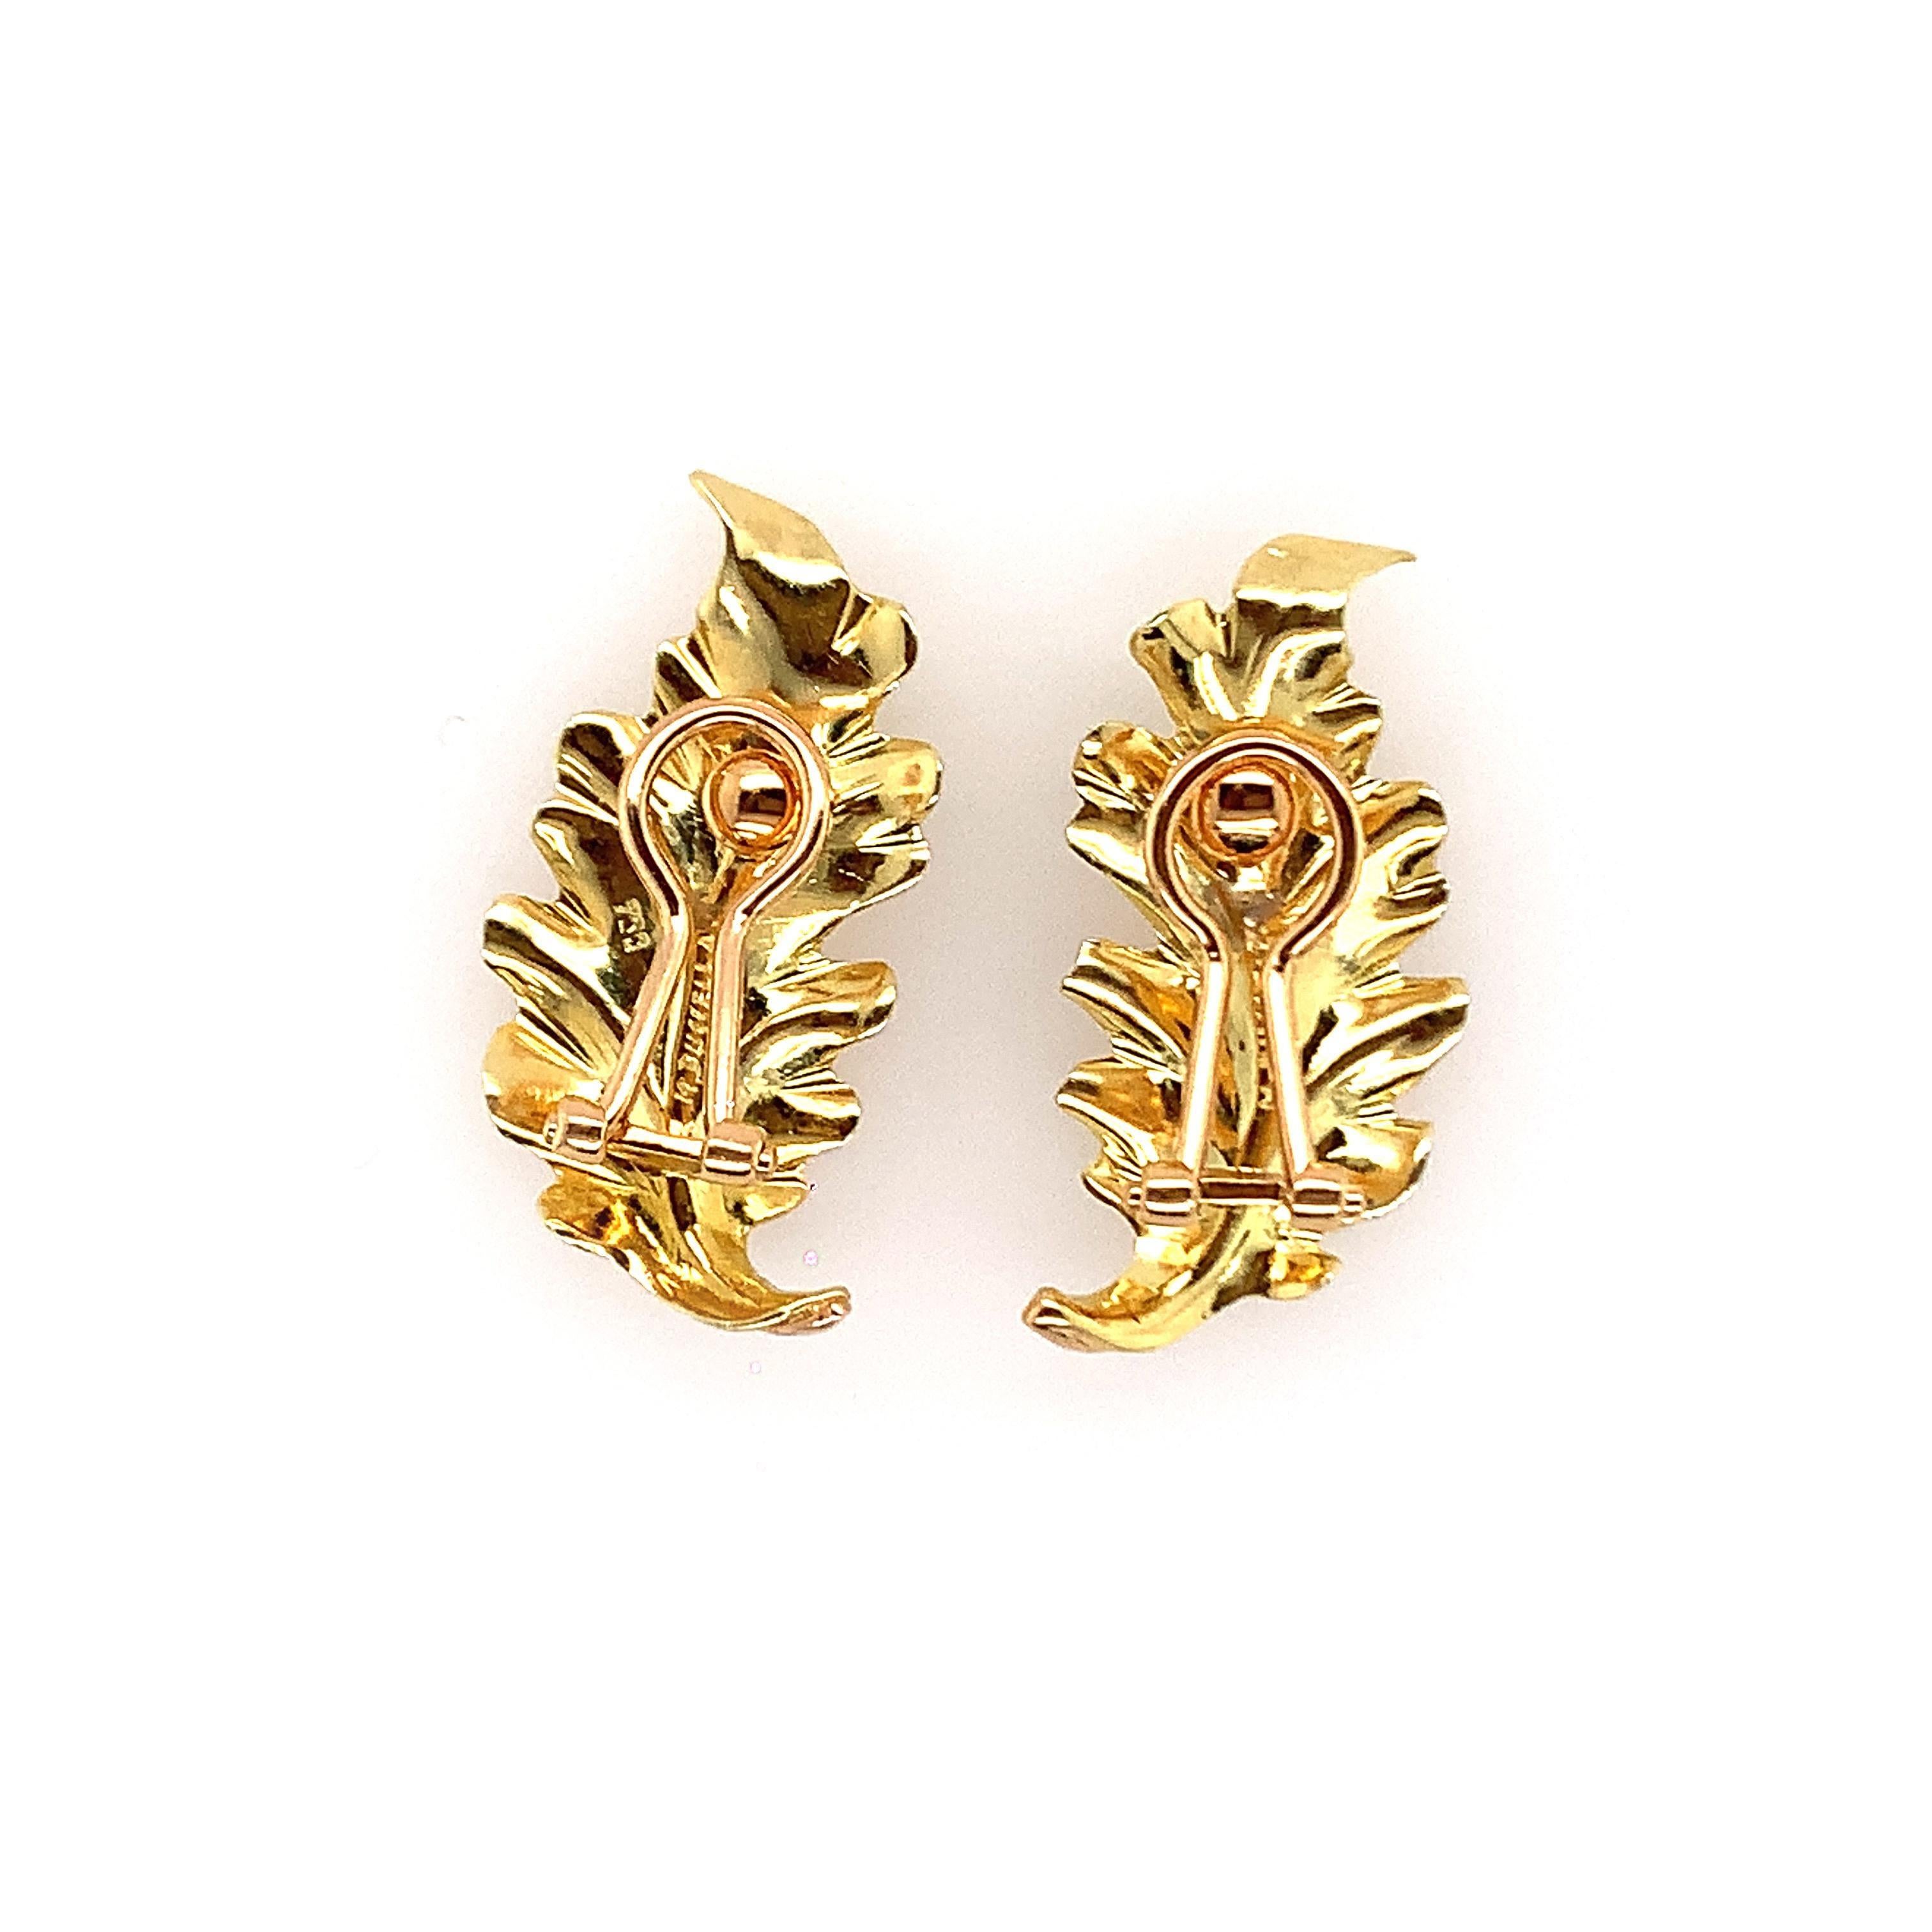 18K Y/gold leaf earclips, signed M.Buccellati 750, measures 1 1/4 x 5/8 inch, weight 4.5 dwt,